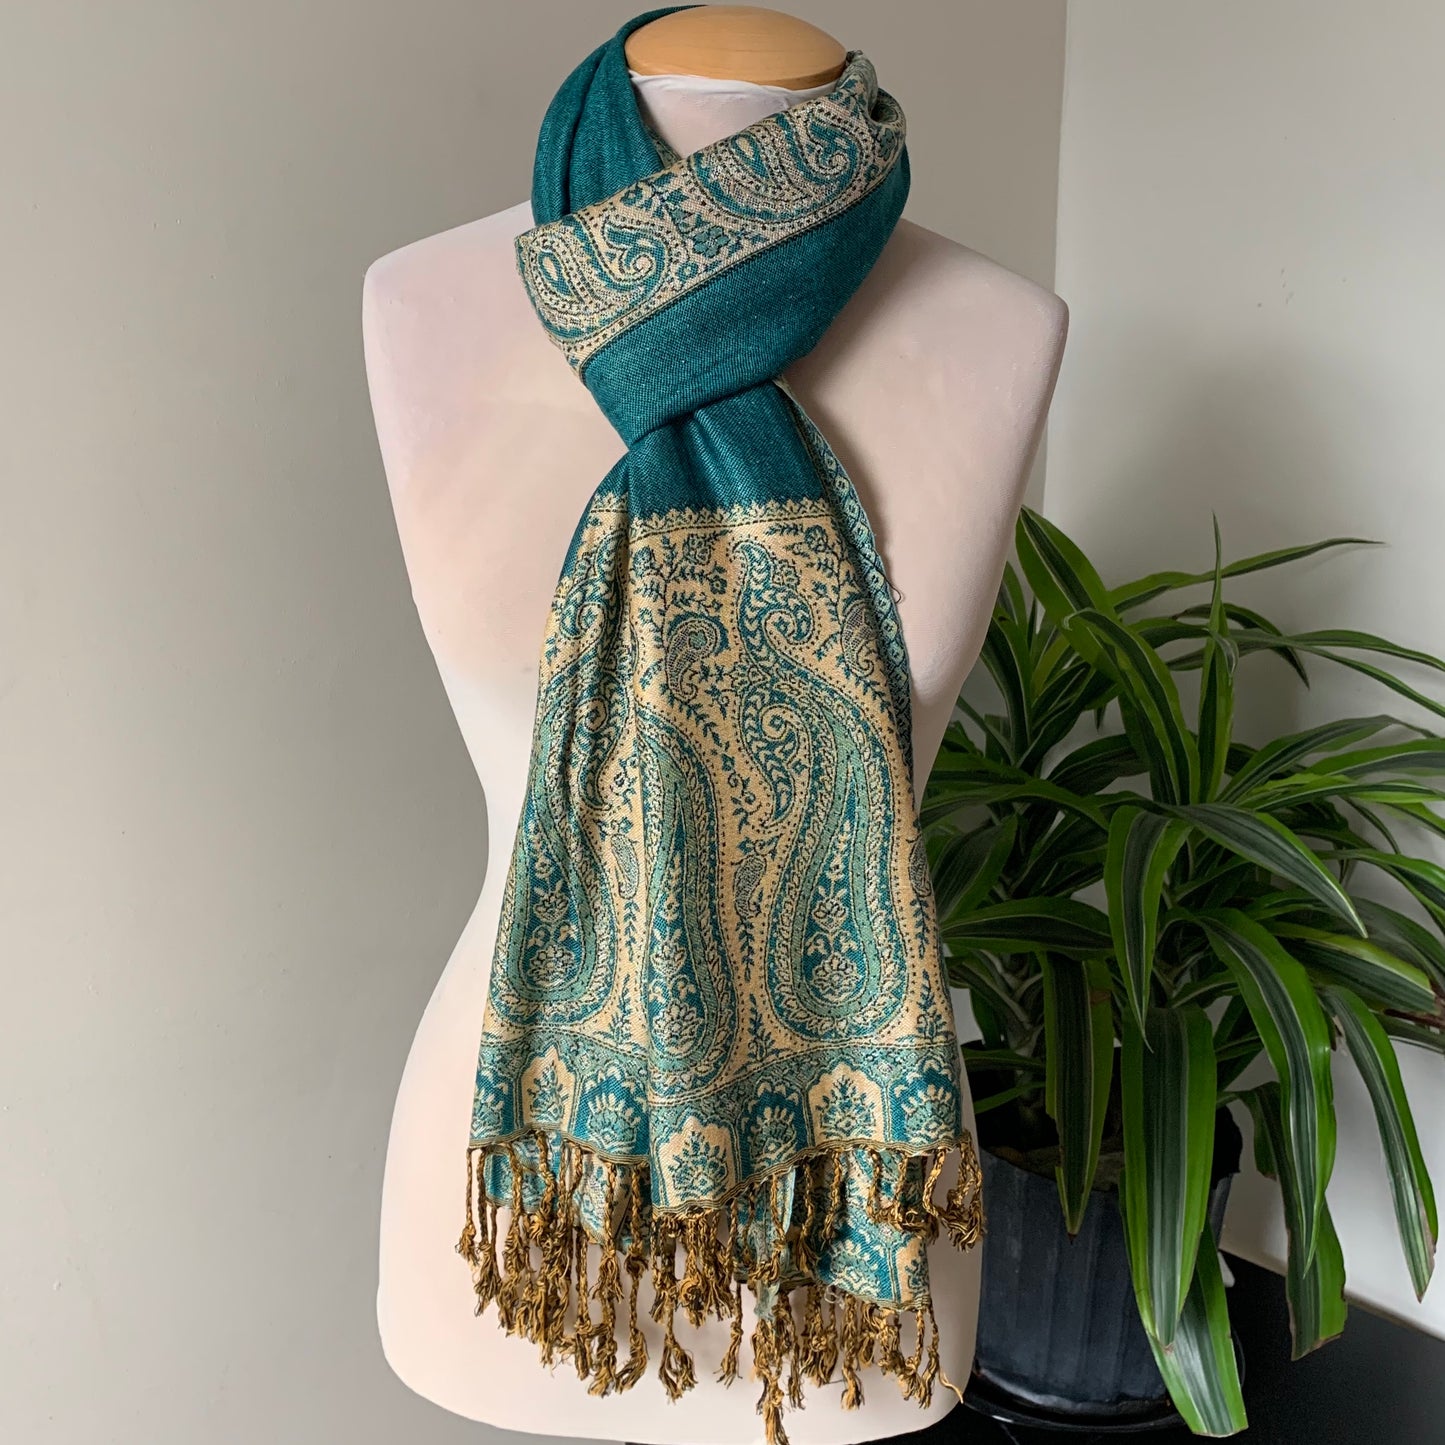 Teal and Beige Reversible Scarf